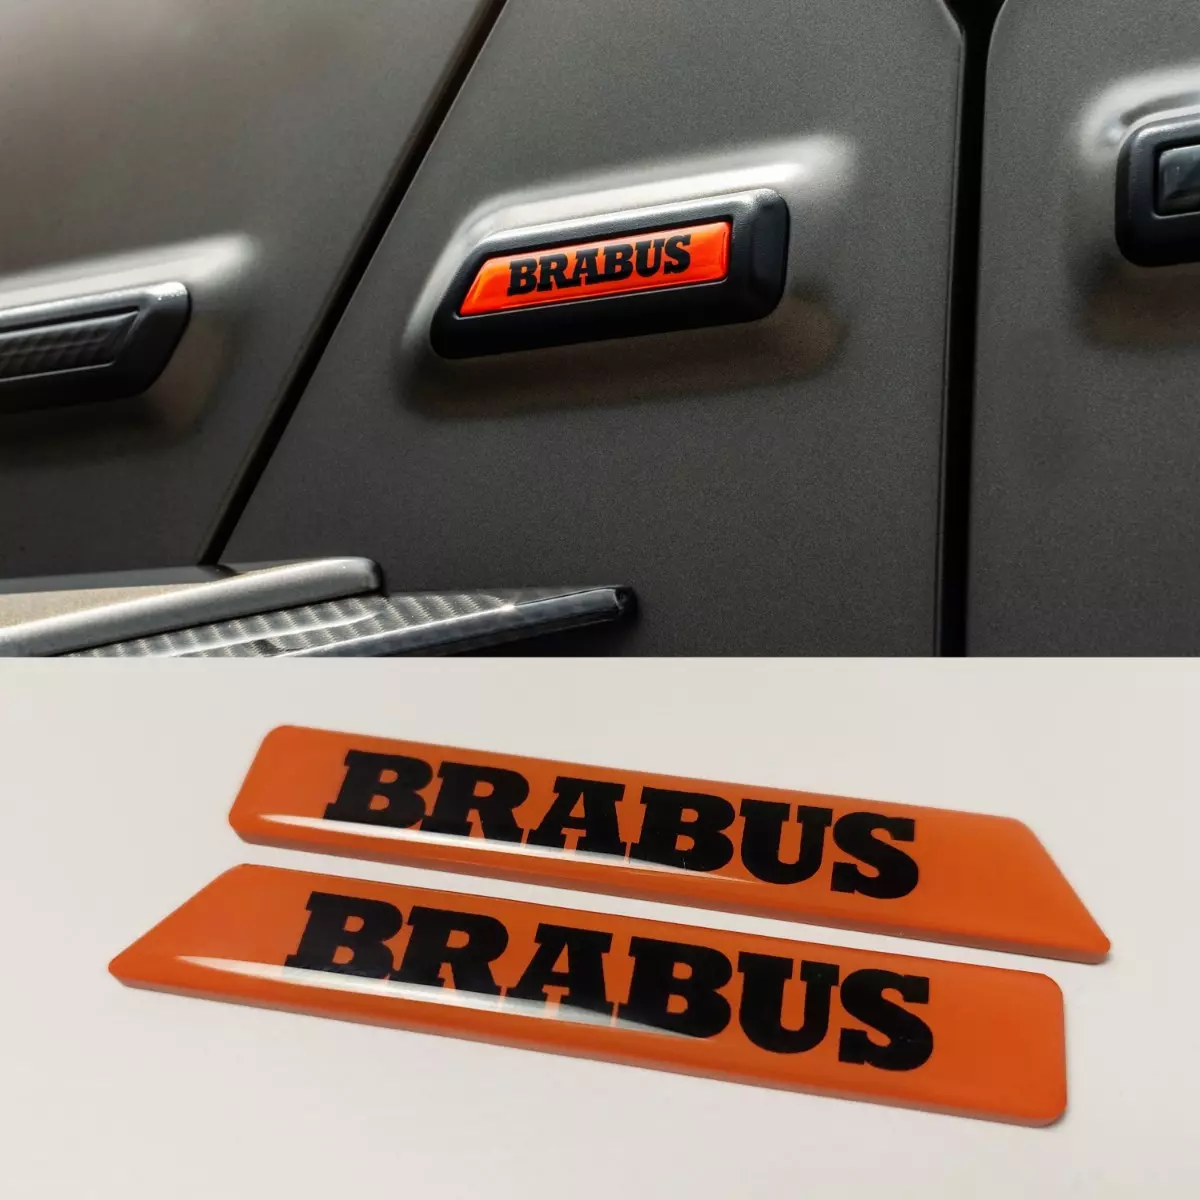 Brabus Fender Emblems Orange Side Moldings Inserts for Mercedes W463A G-Class